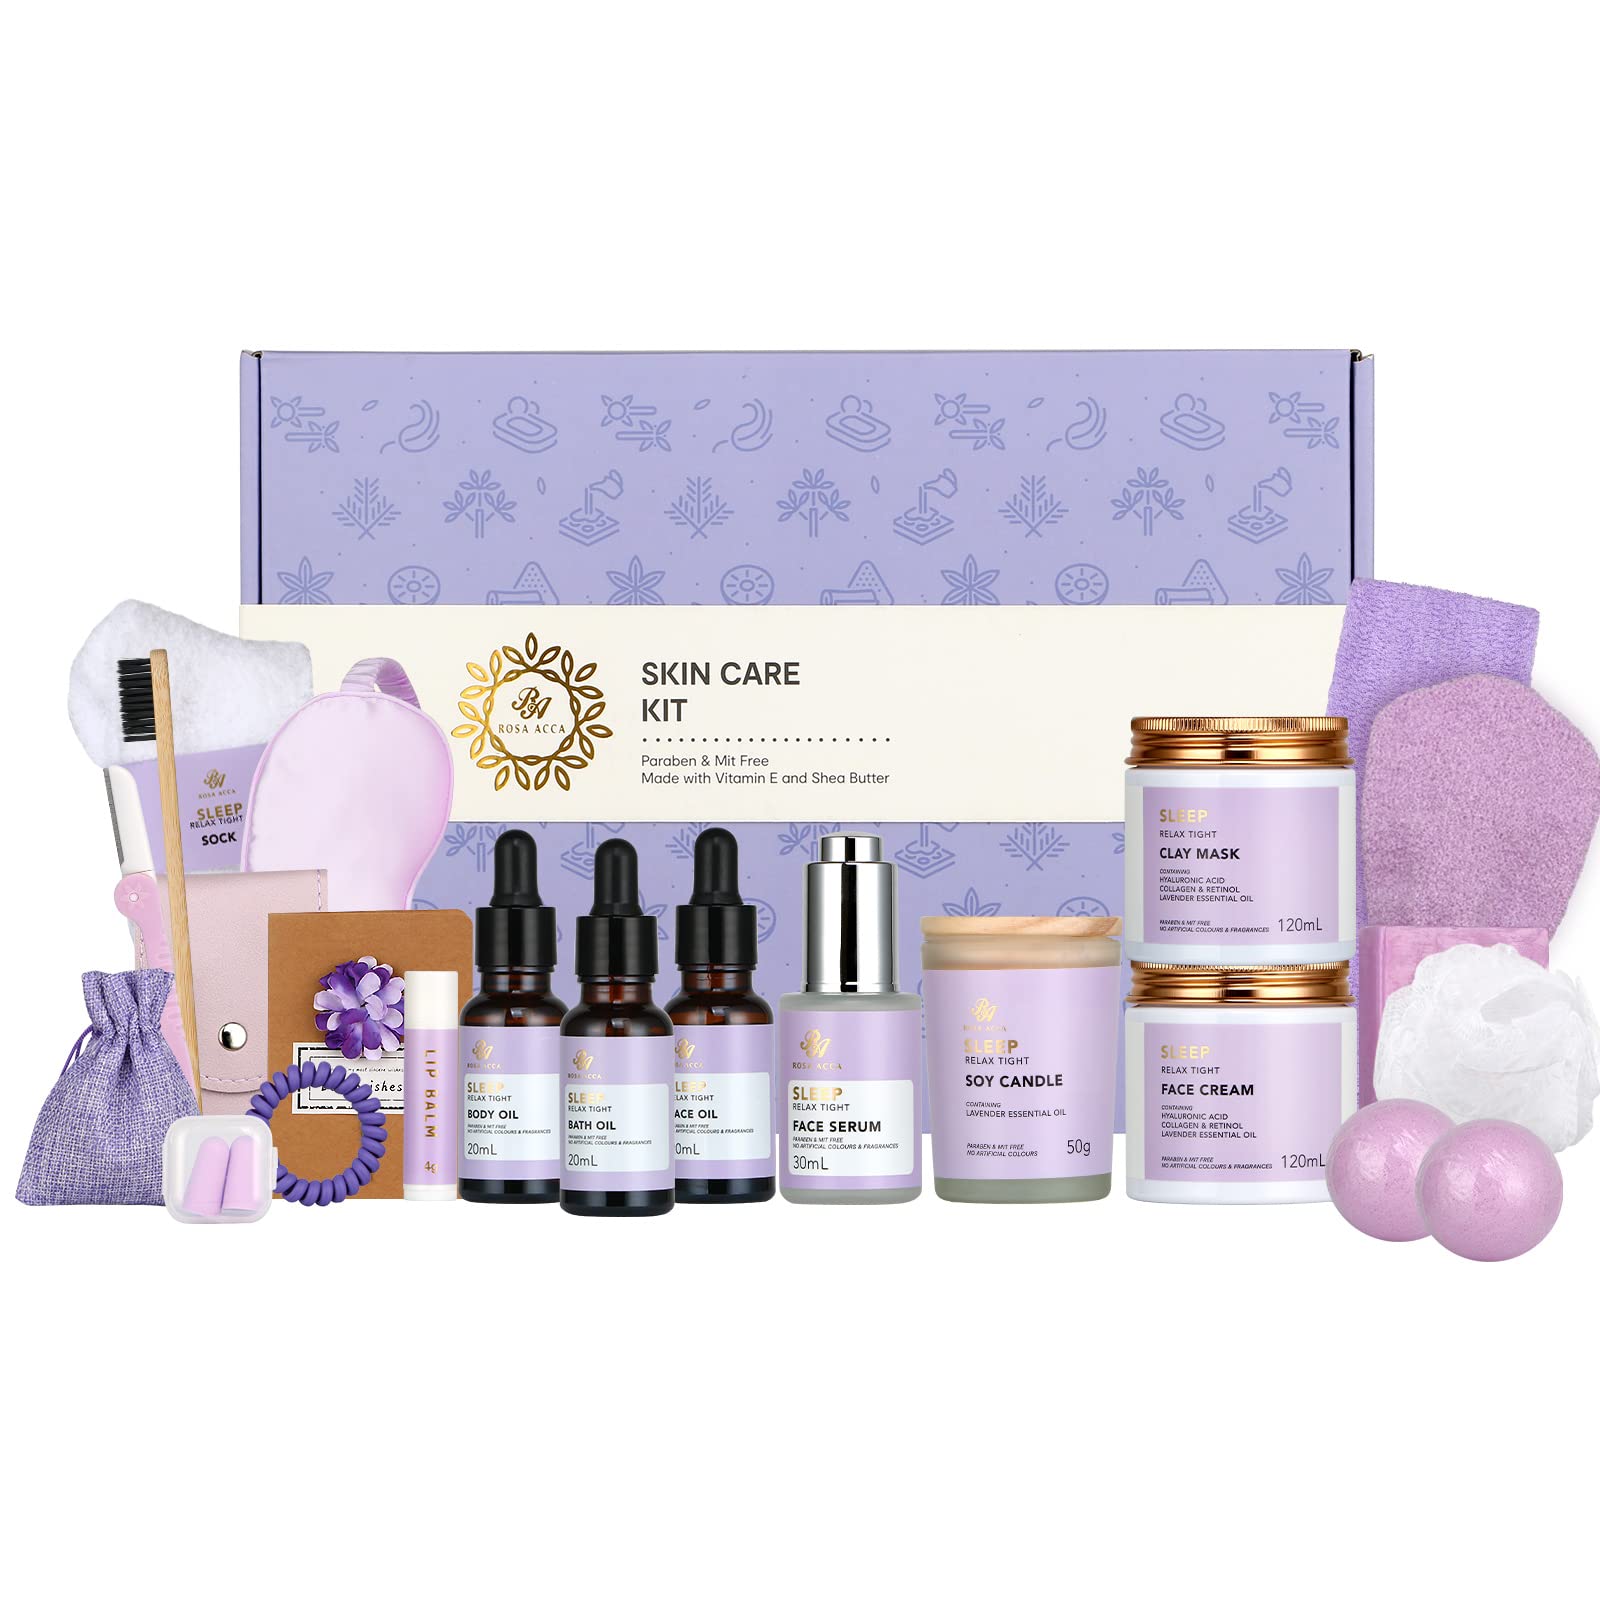 Facial Skin Care Set & Bath Spa Kit Bath and Body At Home Spa Kit Mothers  Day Gifts Ideas Self-care Relaxation Gift Skin Care Collection plus  essential oil Hyaluronic Acid Vitamin E.(Lavender)